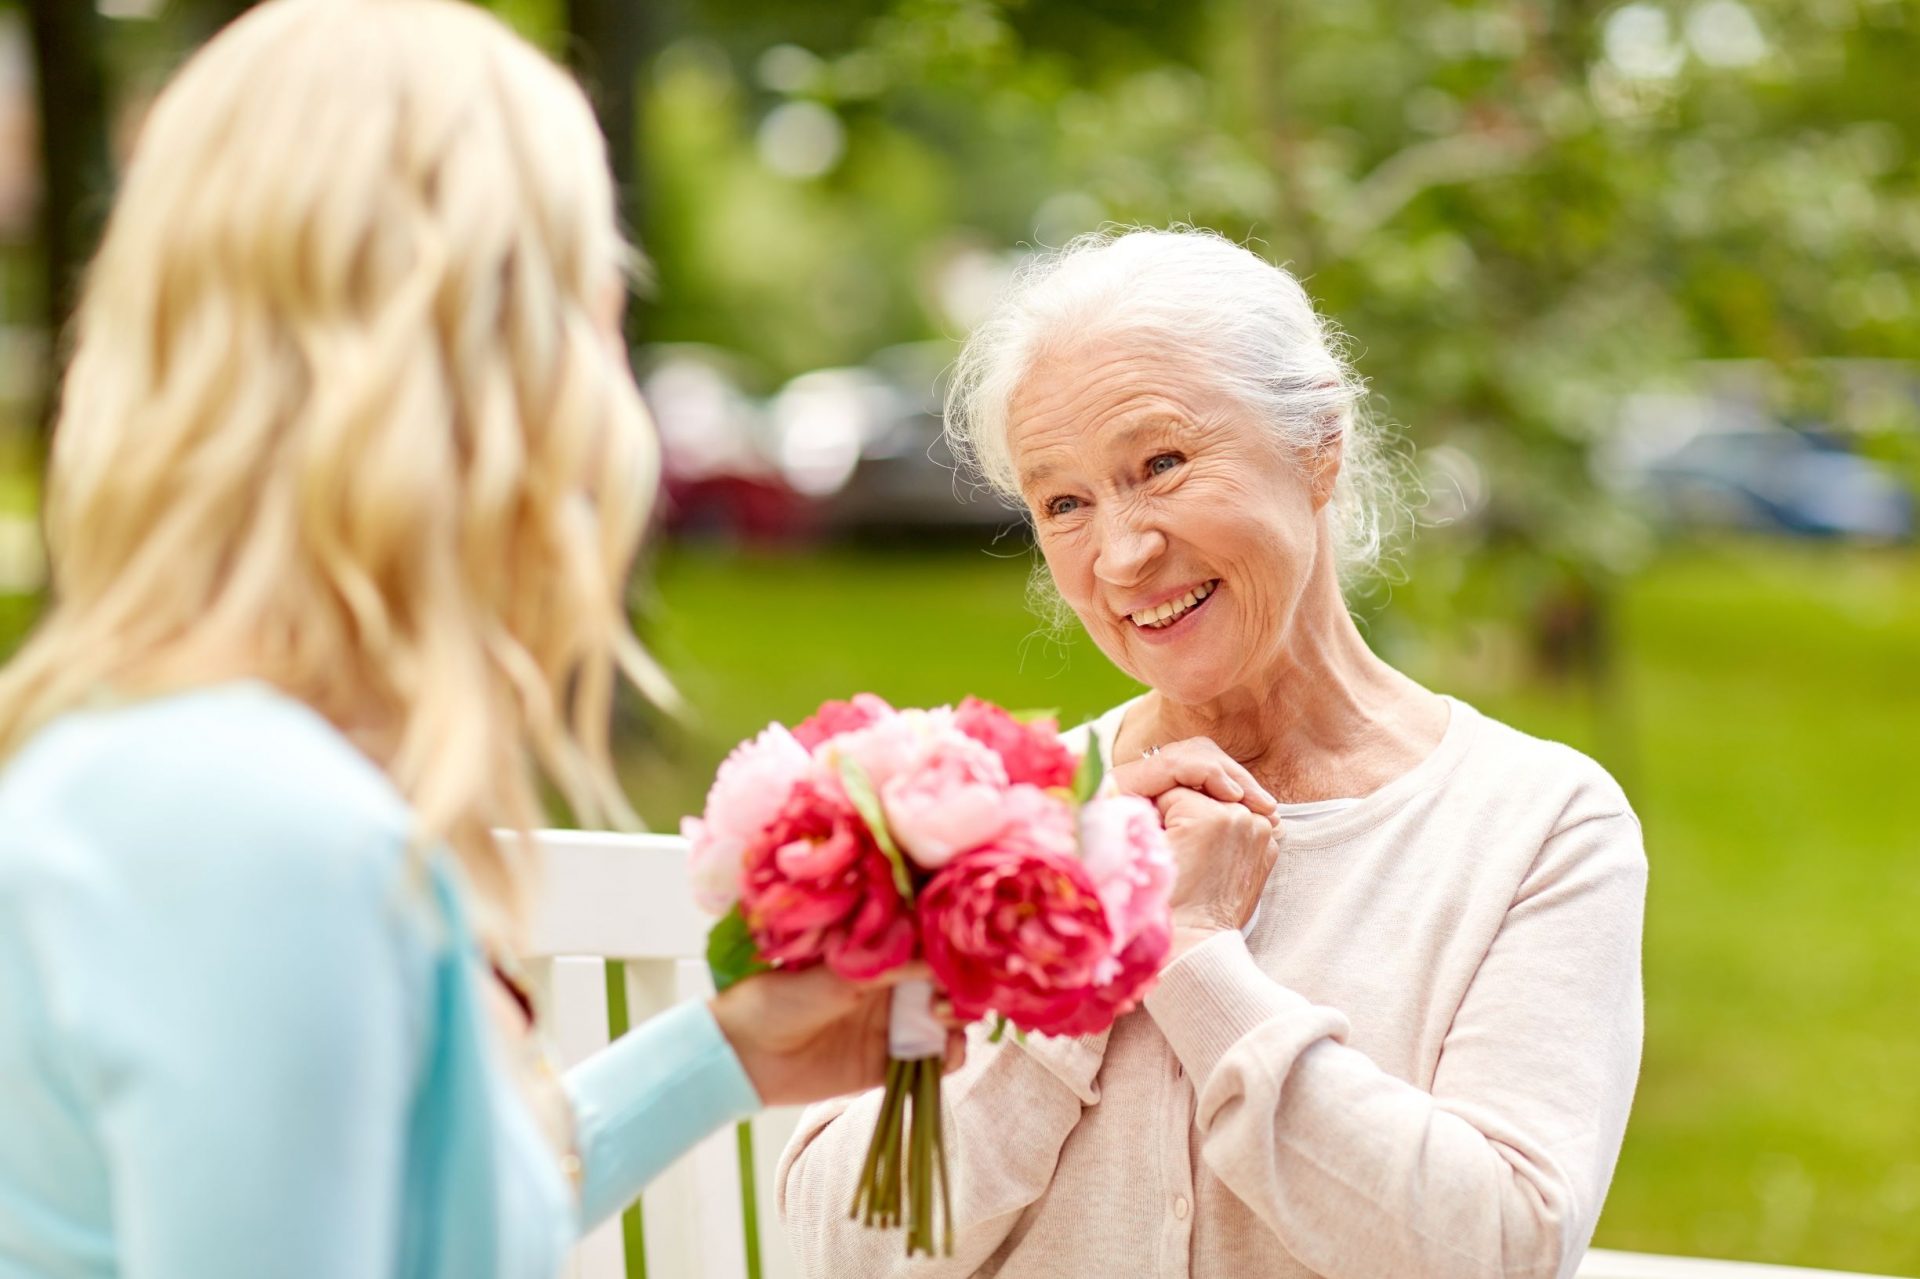 Elderly woman sitting on a bench, gratefully receiving a bouquet from a younger woman.